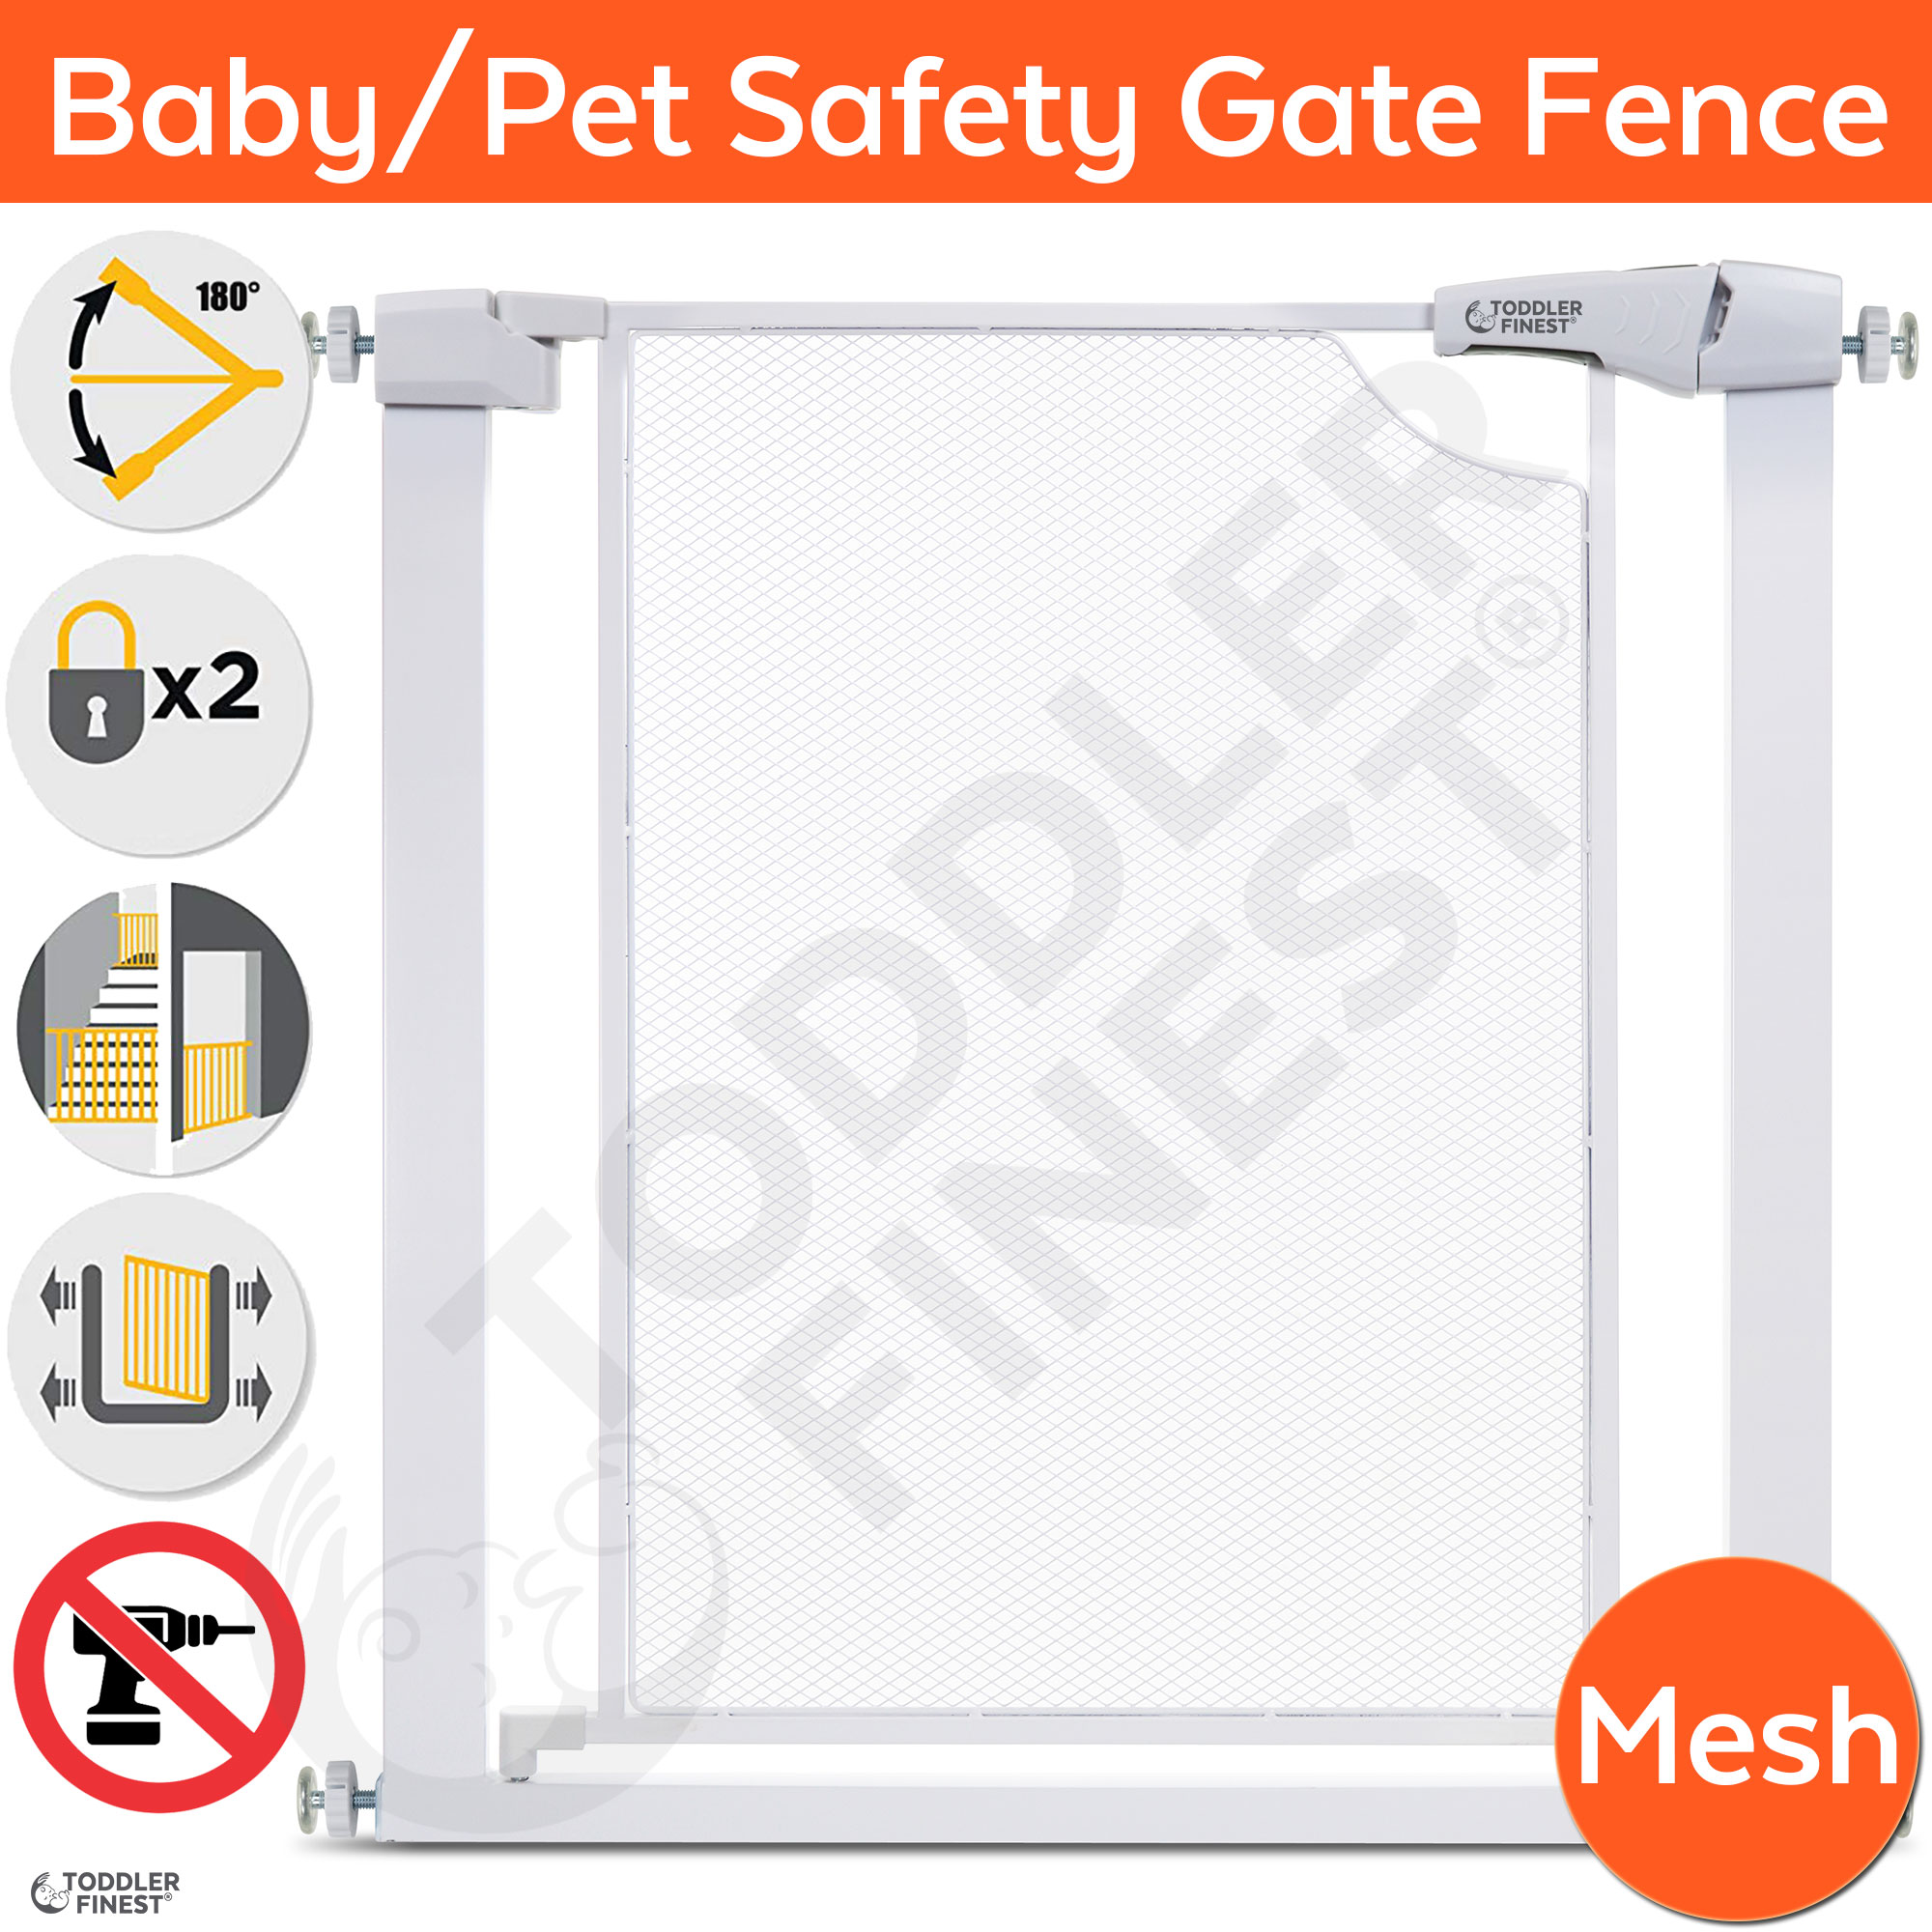 43x28 Pet Safety Gate,Baby Gate,Magic Gate,Portable Folding Mesh Gate Safe Guard Isolated,Outdoor and Indoor Safety Gate Install Anywhere 